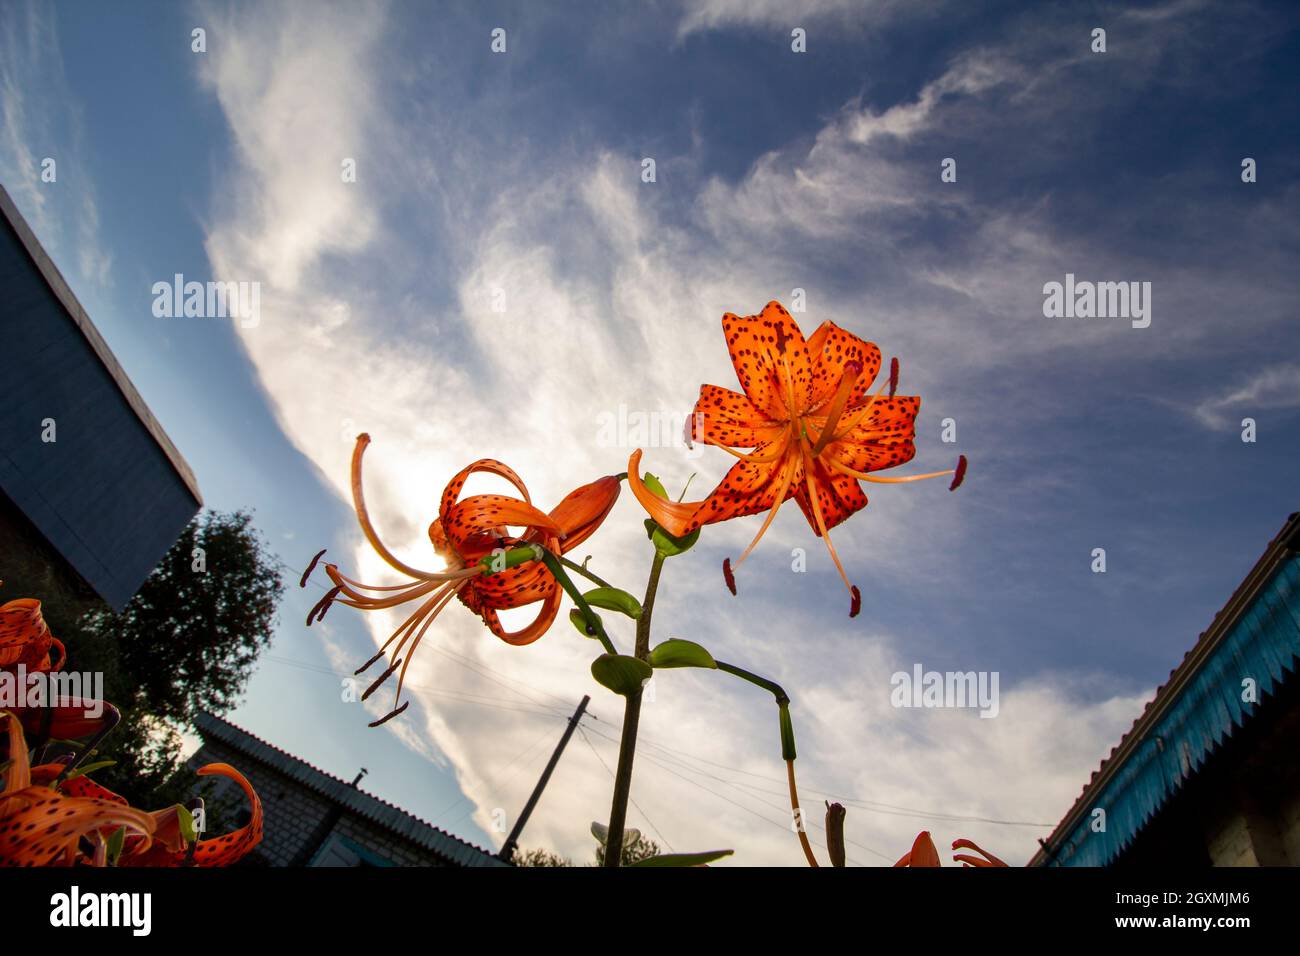 An lily grows in the garden of a country house in the village. Stock Photo